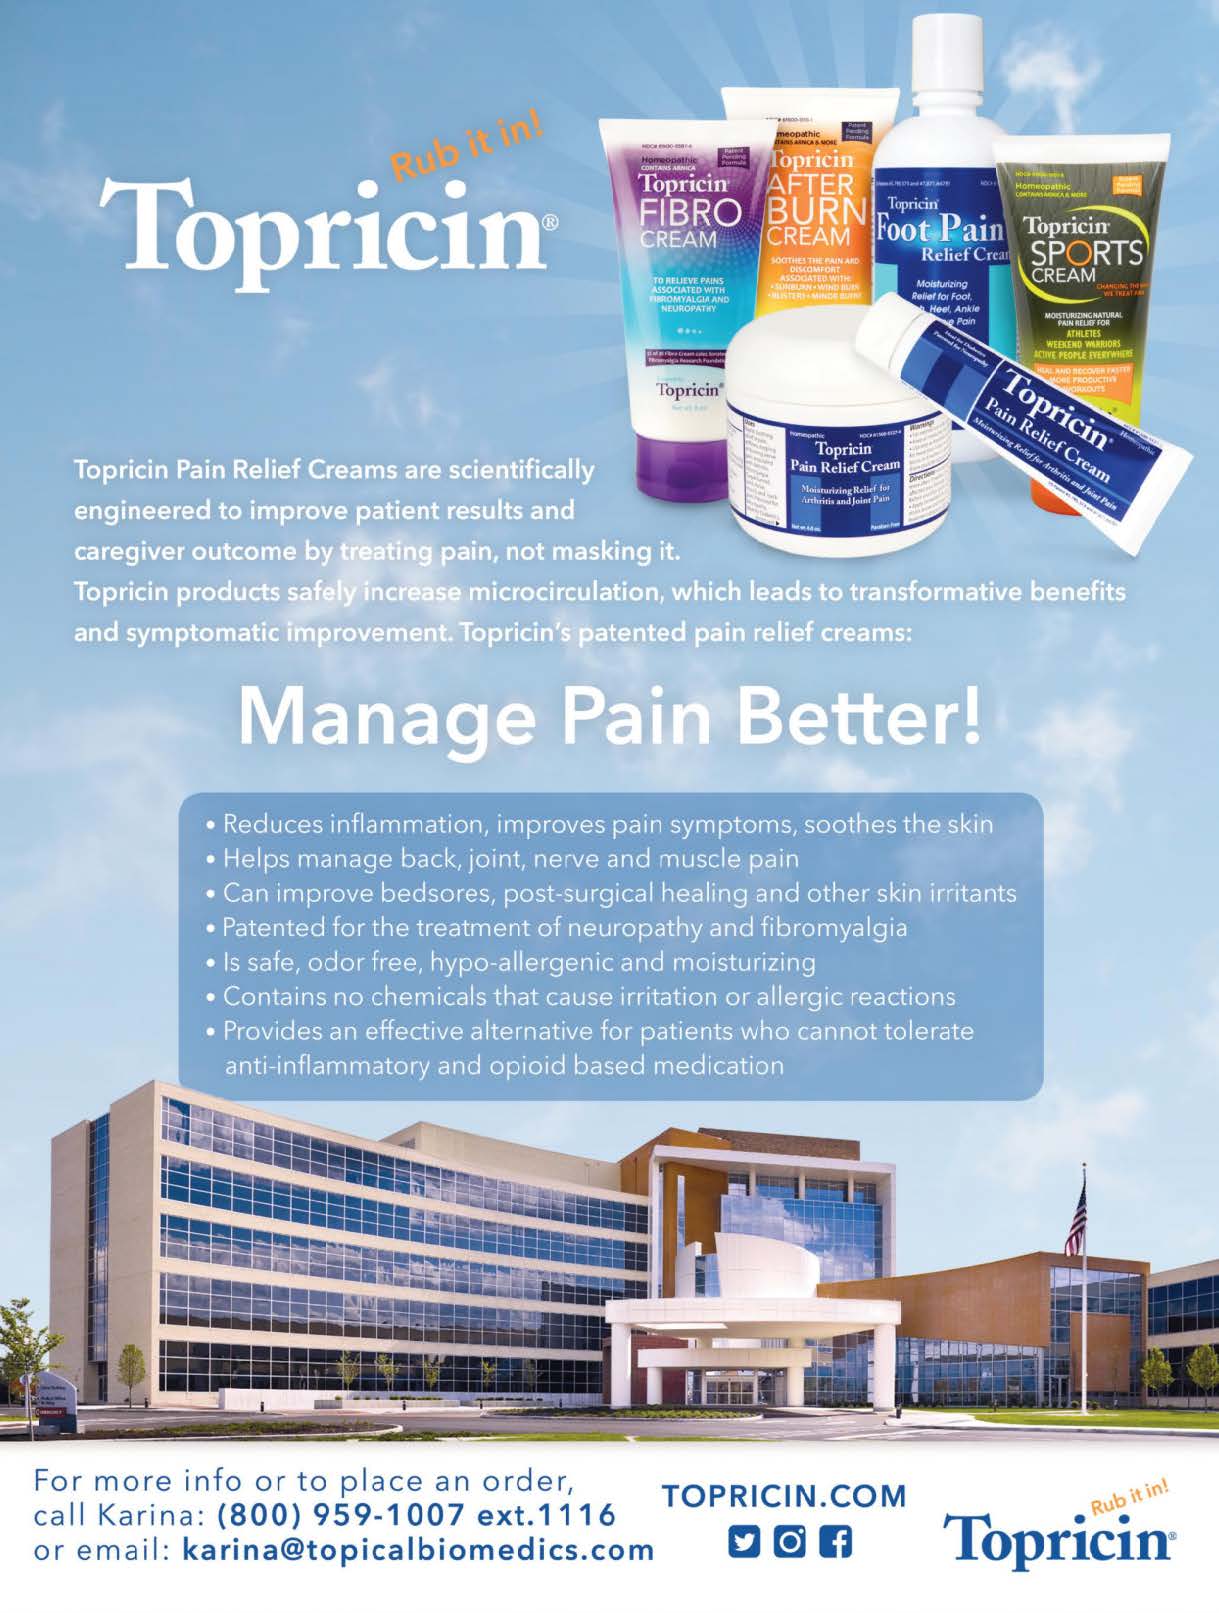 A factory for Topricin